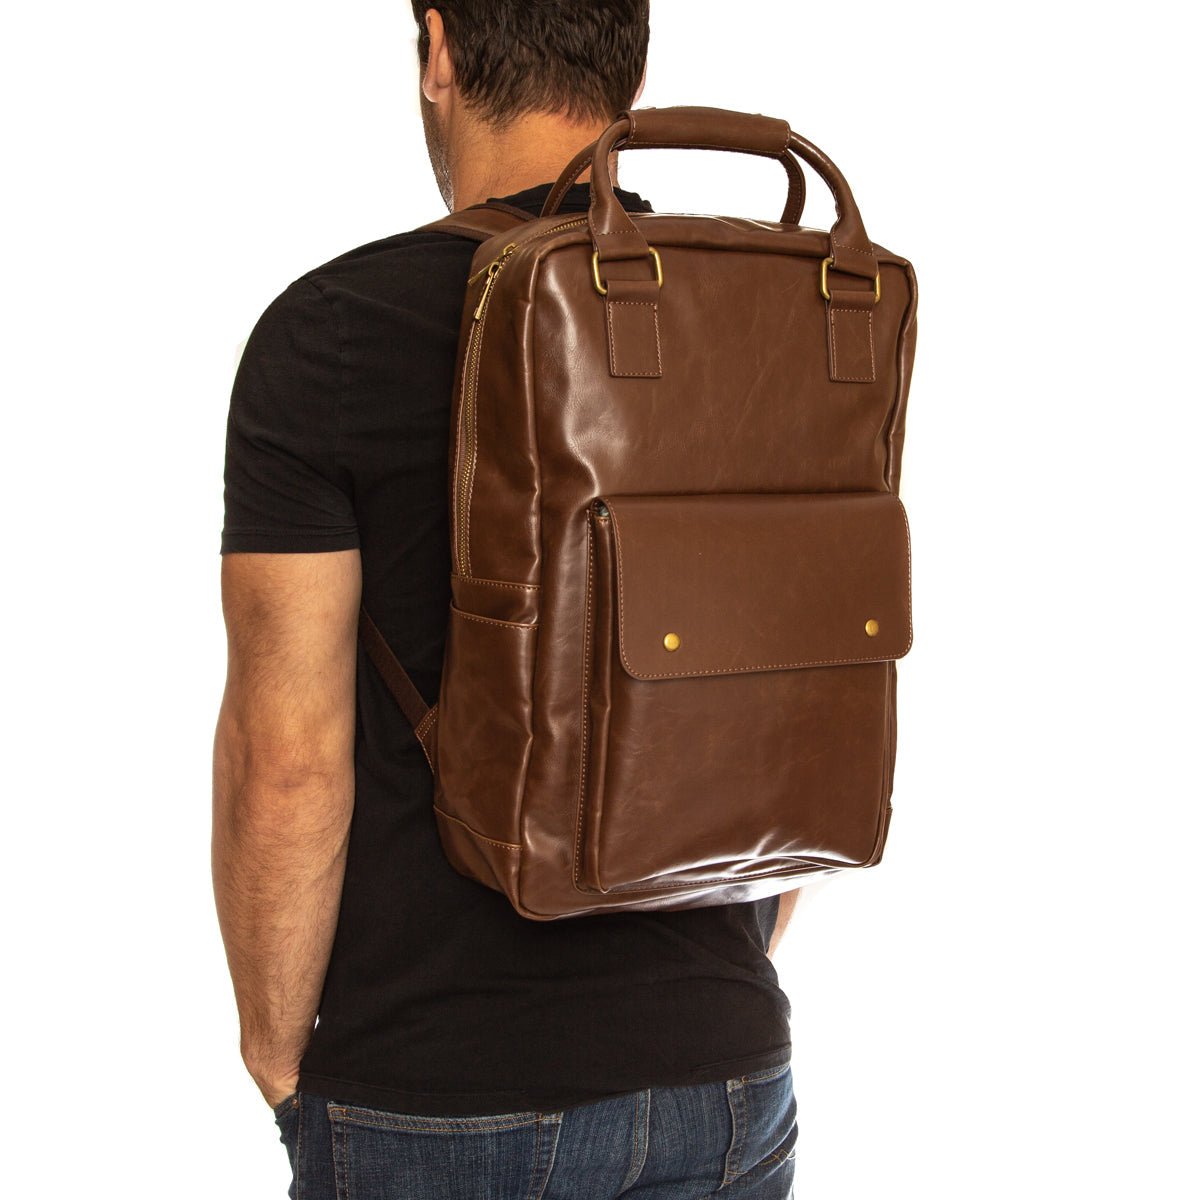 Branded Laptop Backpack on person